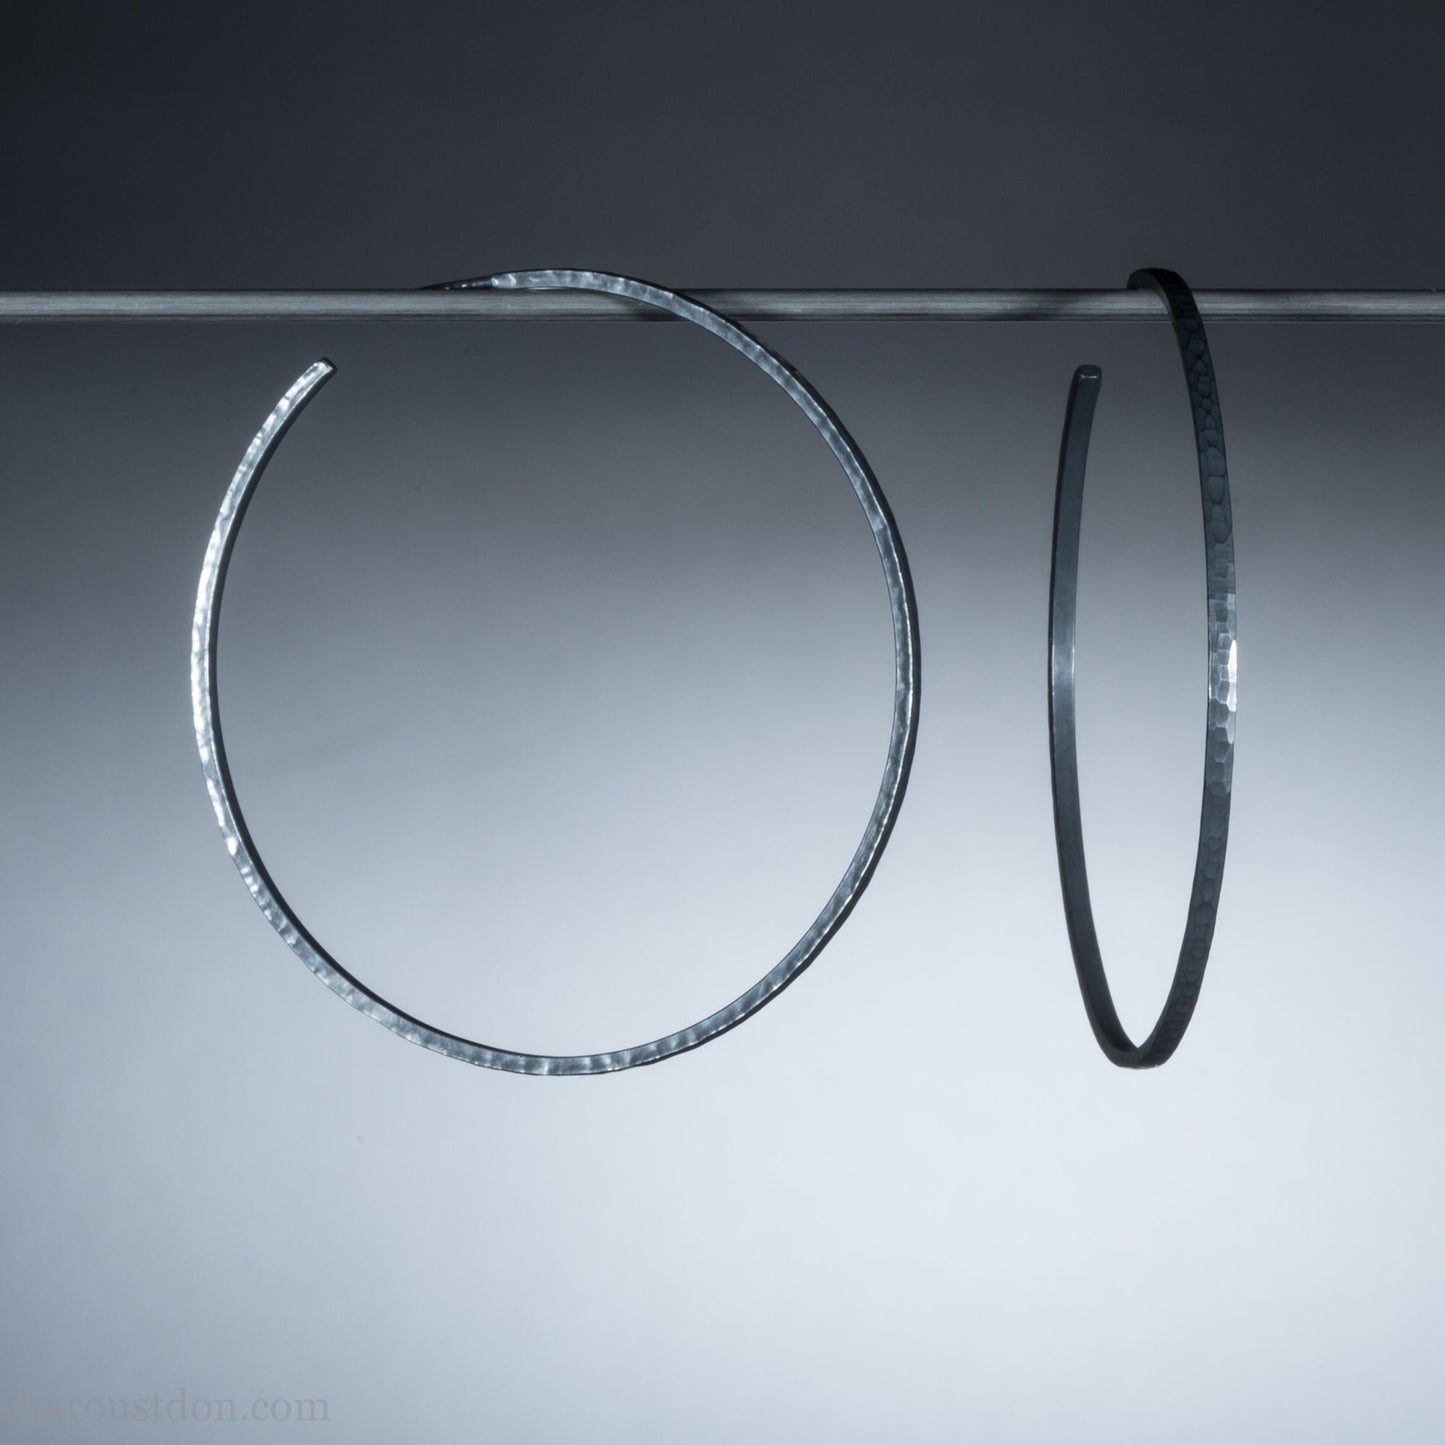 Handmade 925 sterling silver hoop earrings for women. 55mm diameter, 2mm wide, oxidized black, large hoops for daily wear. Minimalist, comfortable, lightweight with a hammered, texture.